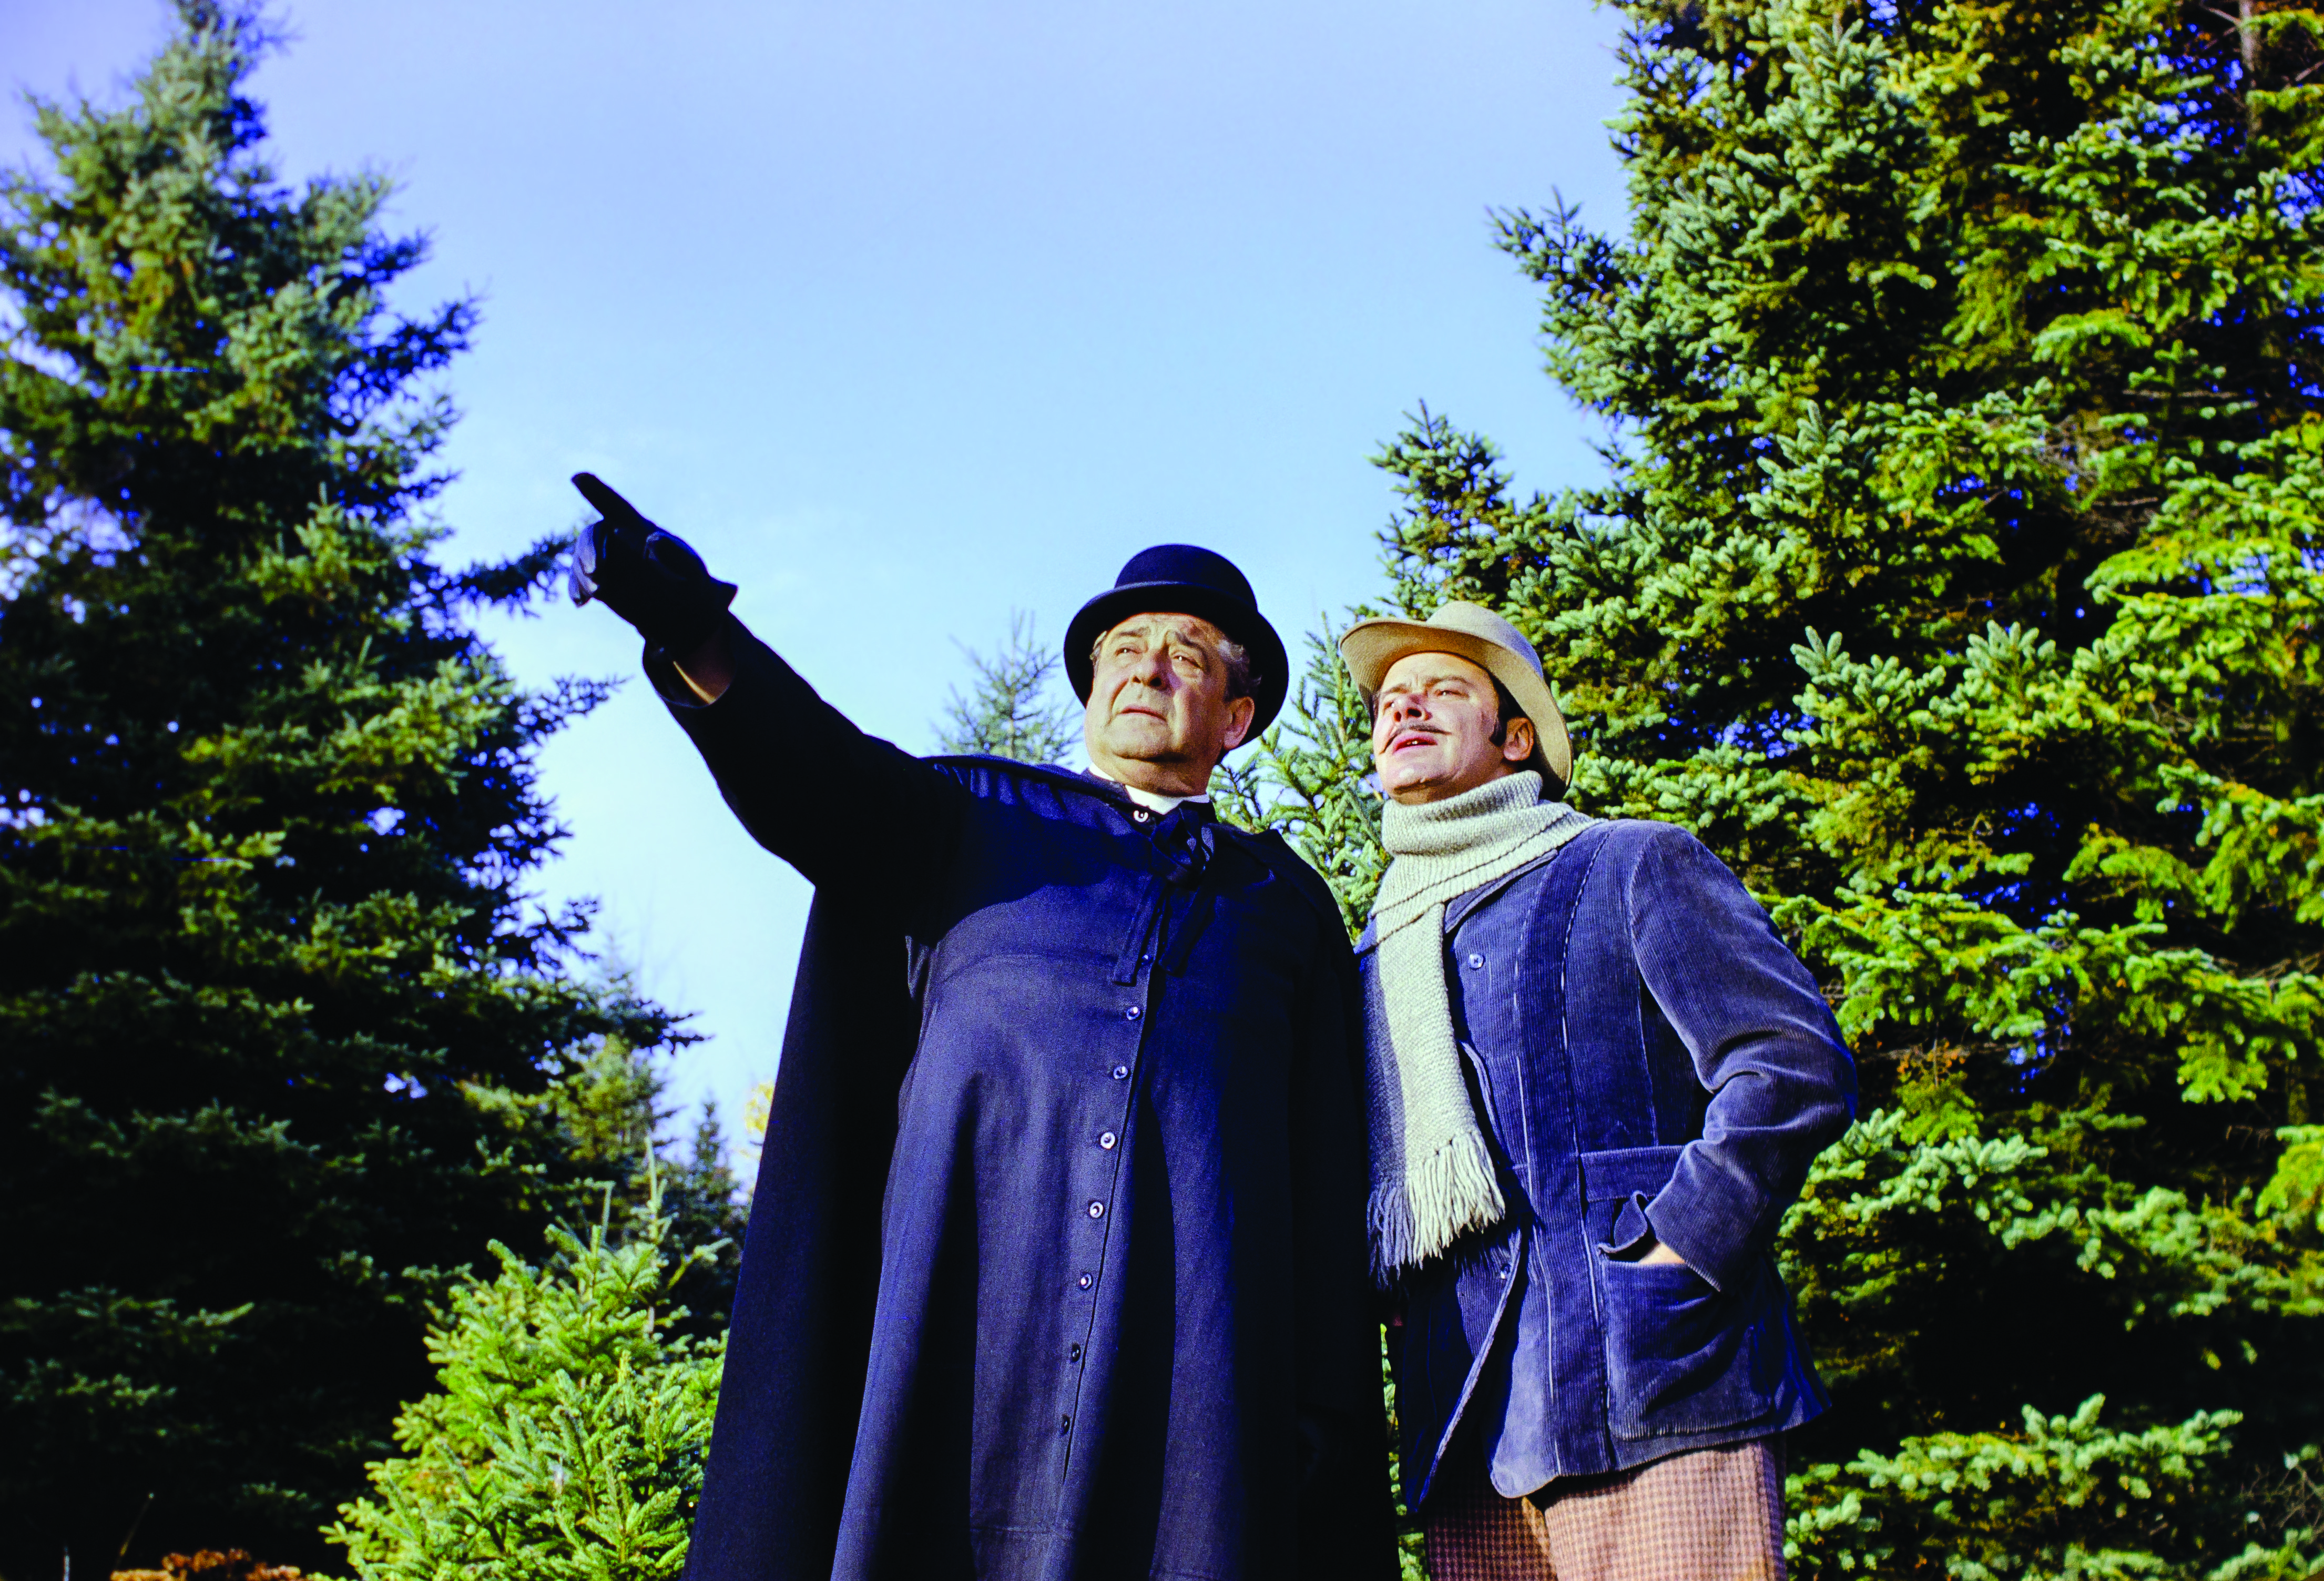 Colour photograph of two actors in a forest setting. A man in a cassock, playing Curé Labelle, points to something in the distance. The man accompanying him, wearing a coat, scarf and hat, stands close to him and gazes into the distance.